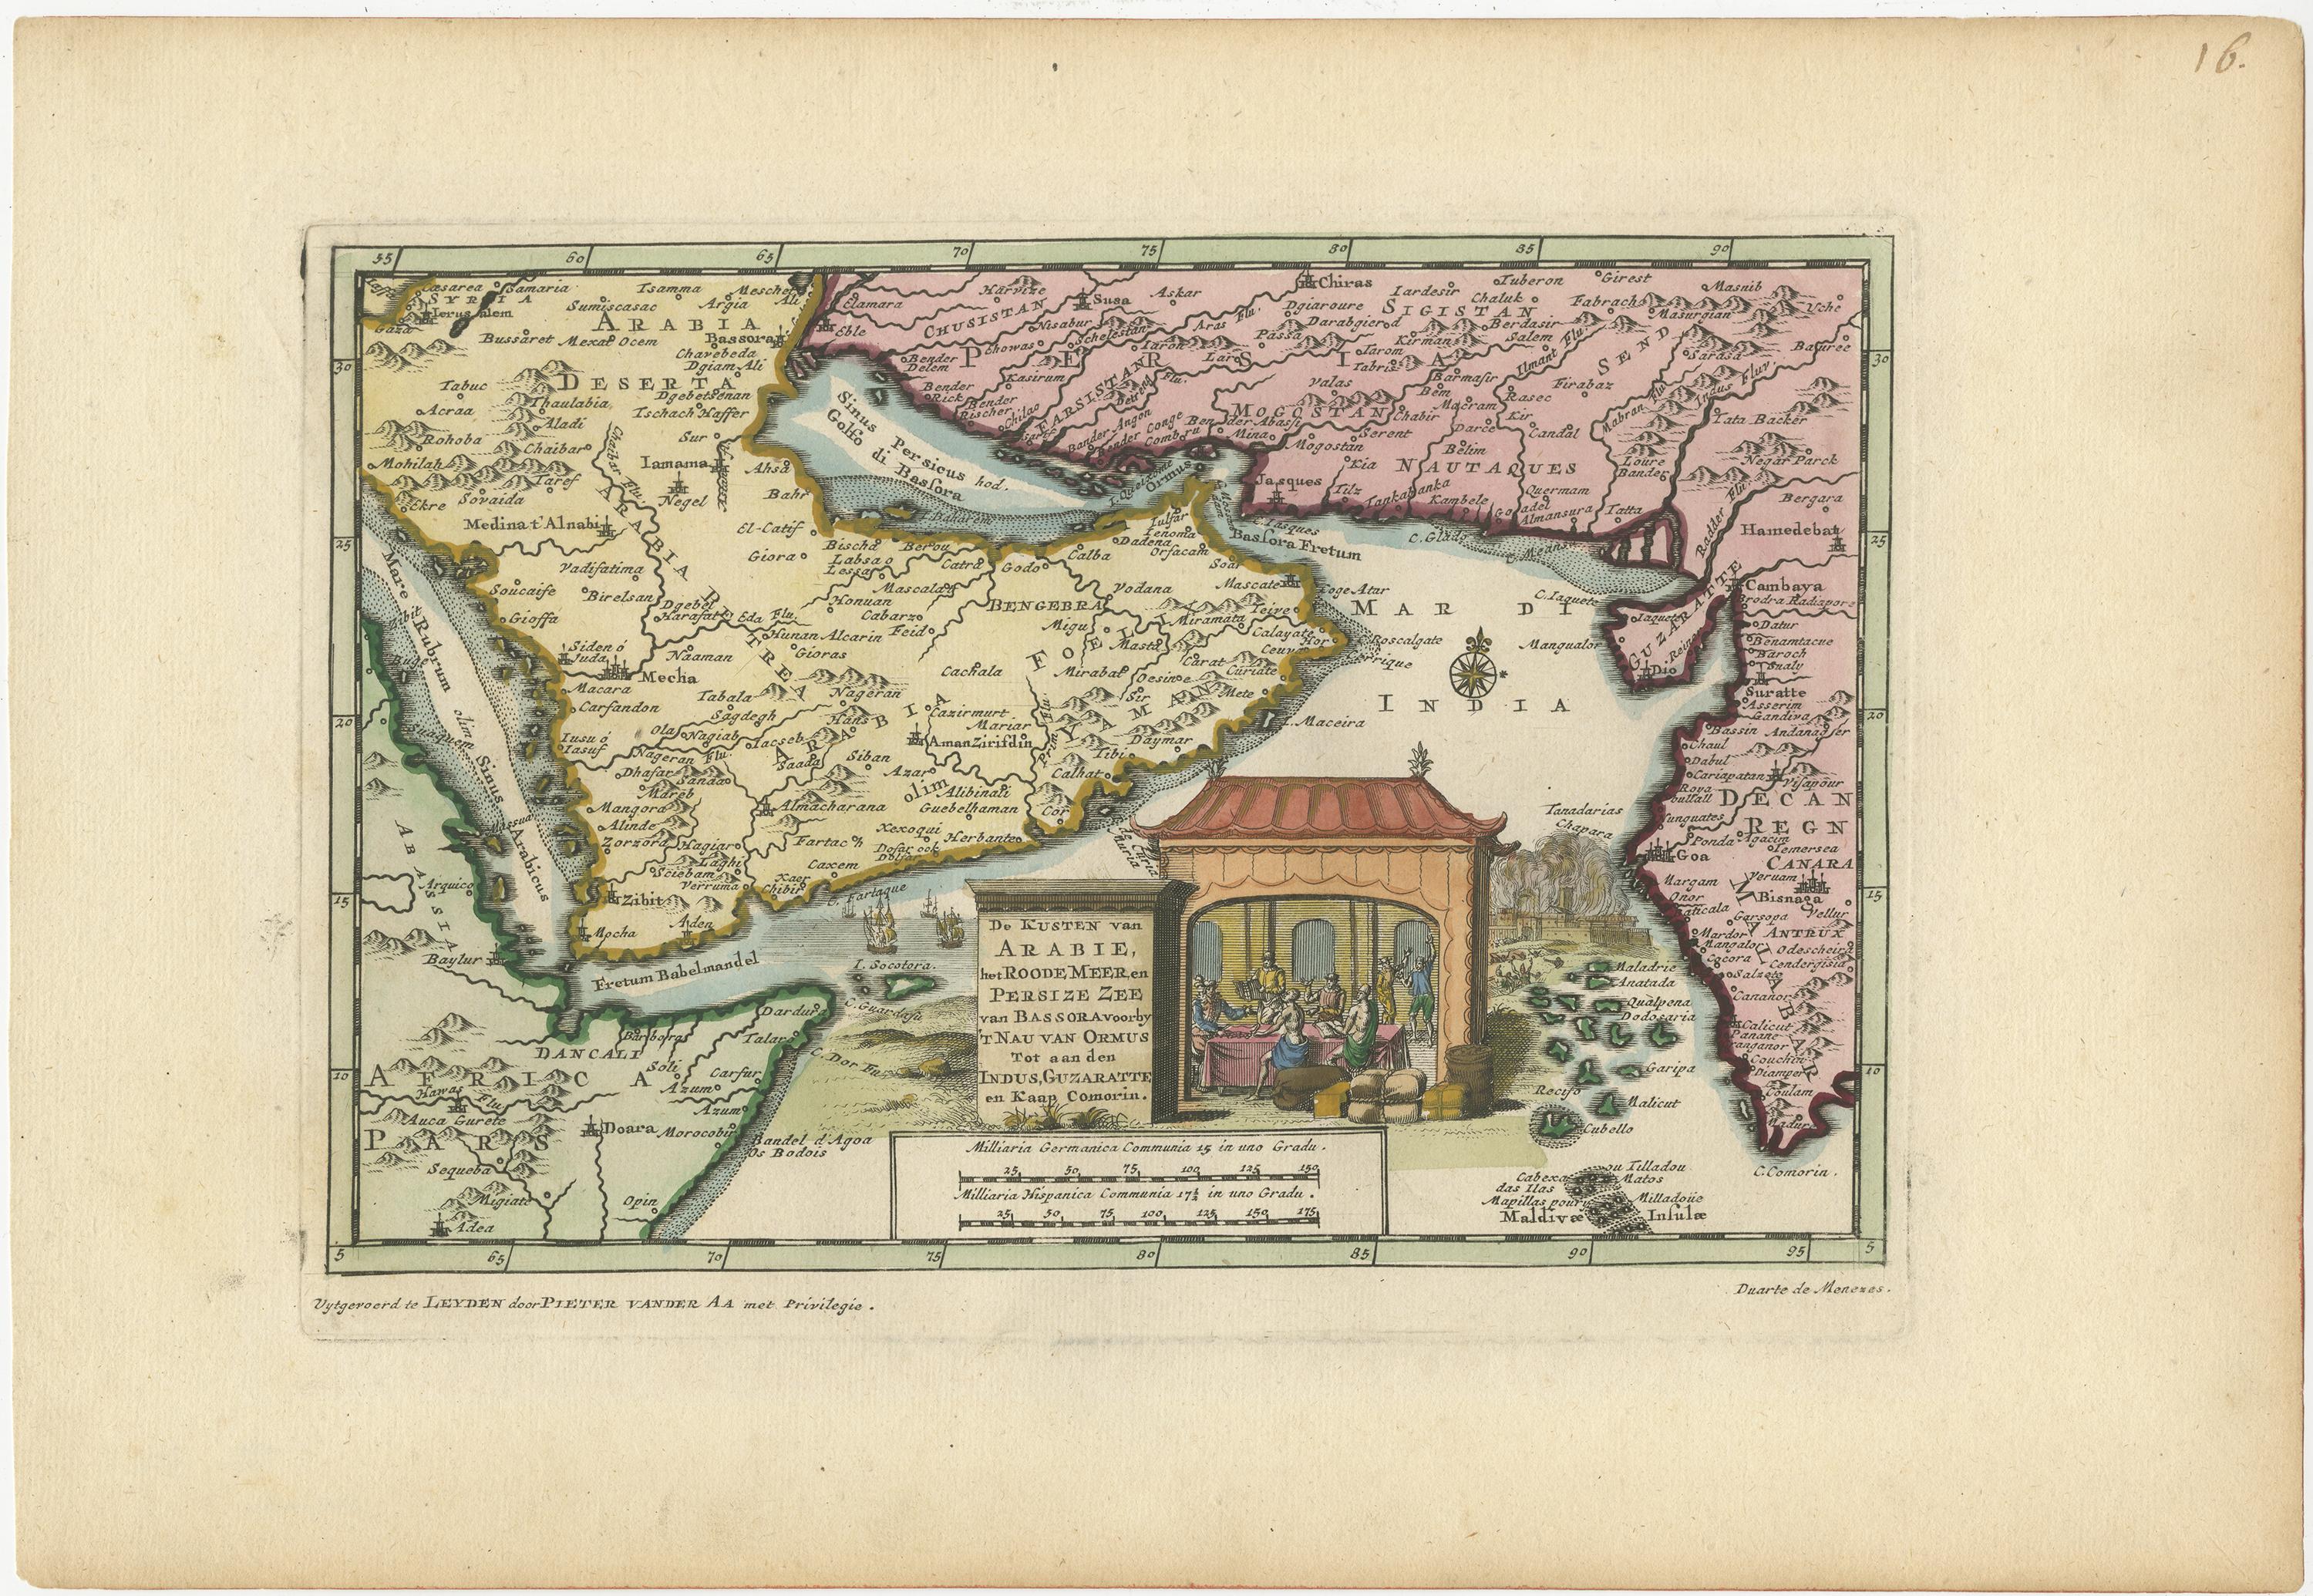 Wonderful small map covering the coasts of Arabia, Persia and western India. It illustrates the voyages of Duarte de Menezes, who became the Viceroy of Portuguese India. Van der Aa's maps were typical of much cartography of the time, in which more